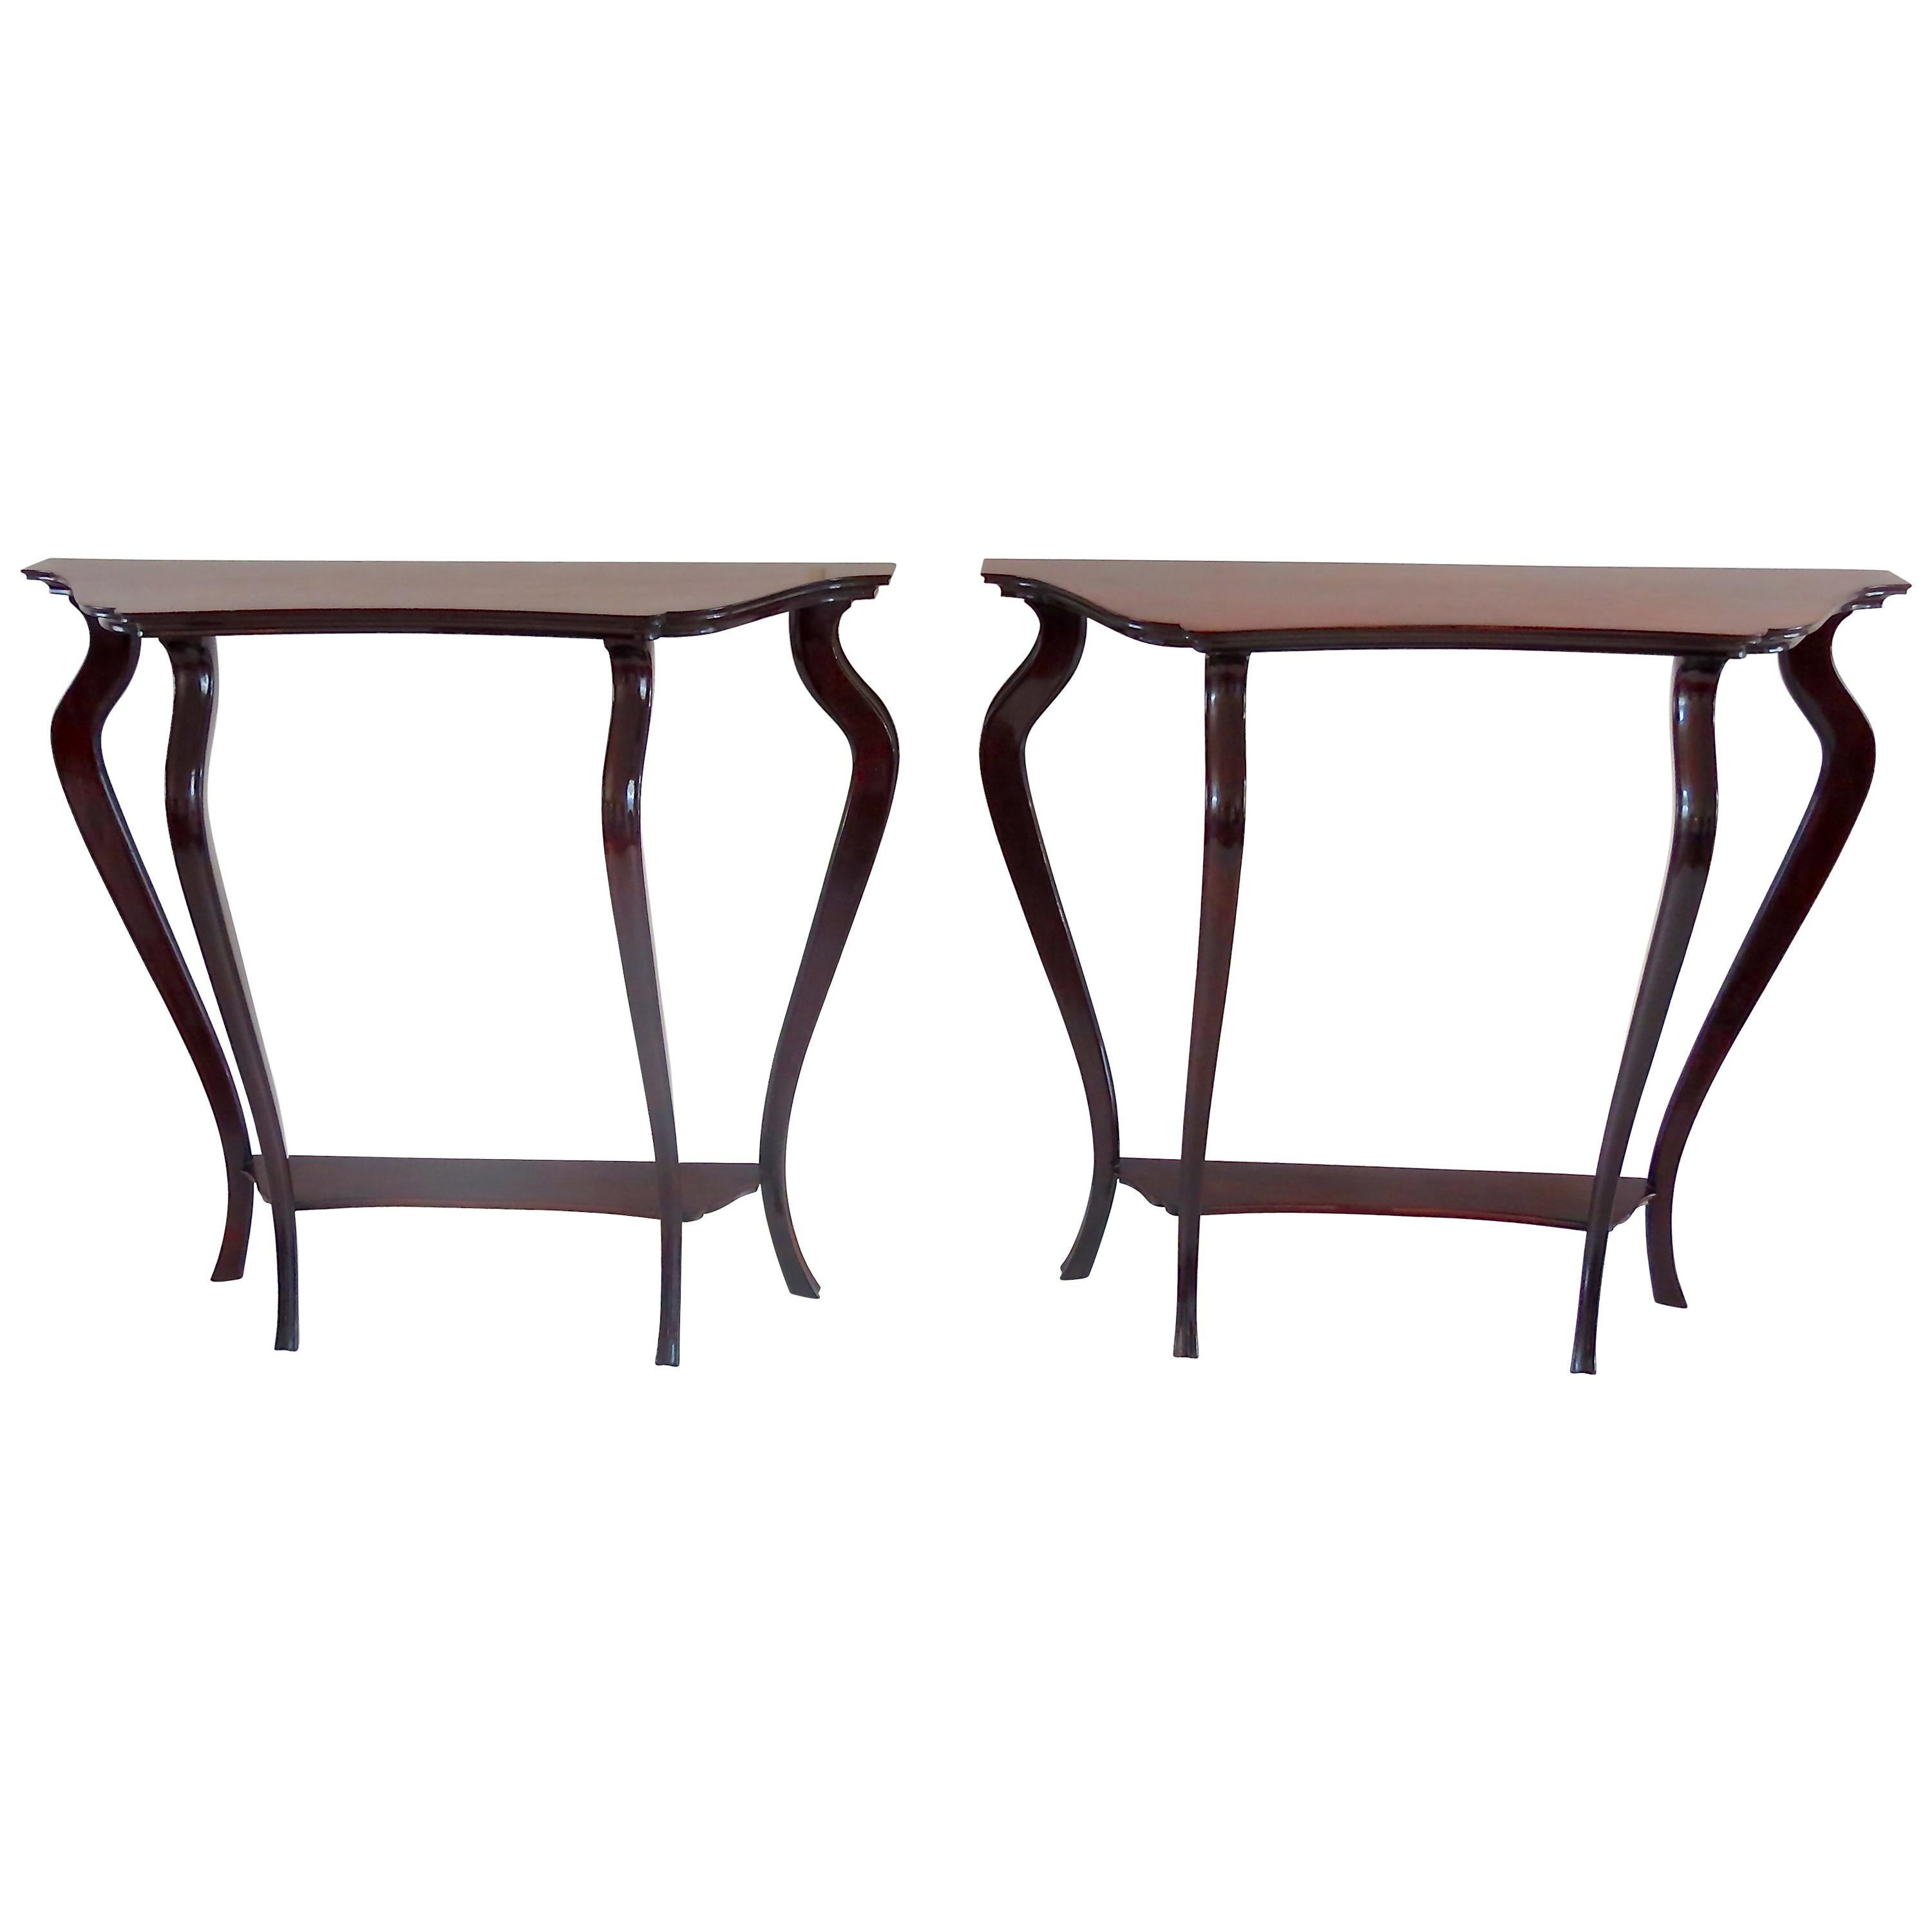 Pair of Unique Walnut Curved Console by Arch. Tempestini, 1940-1950